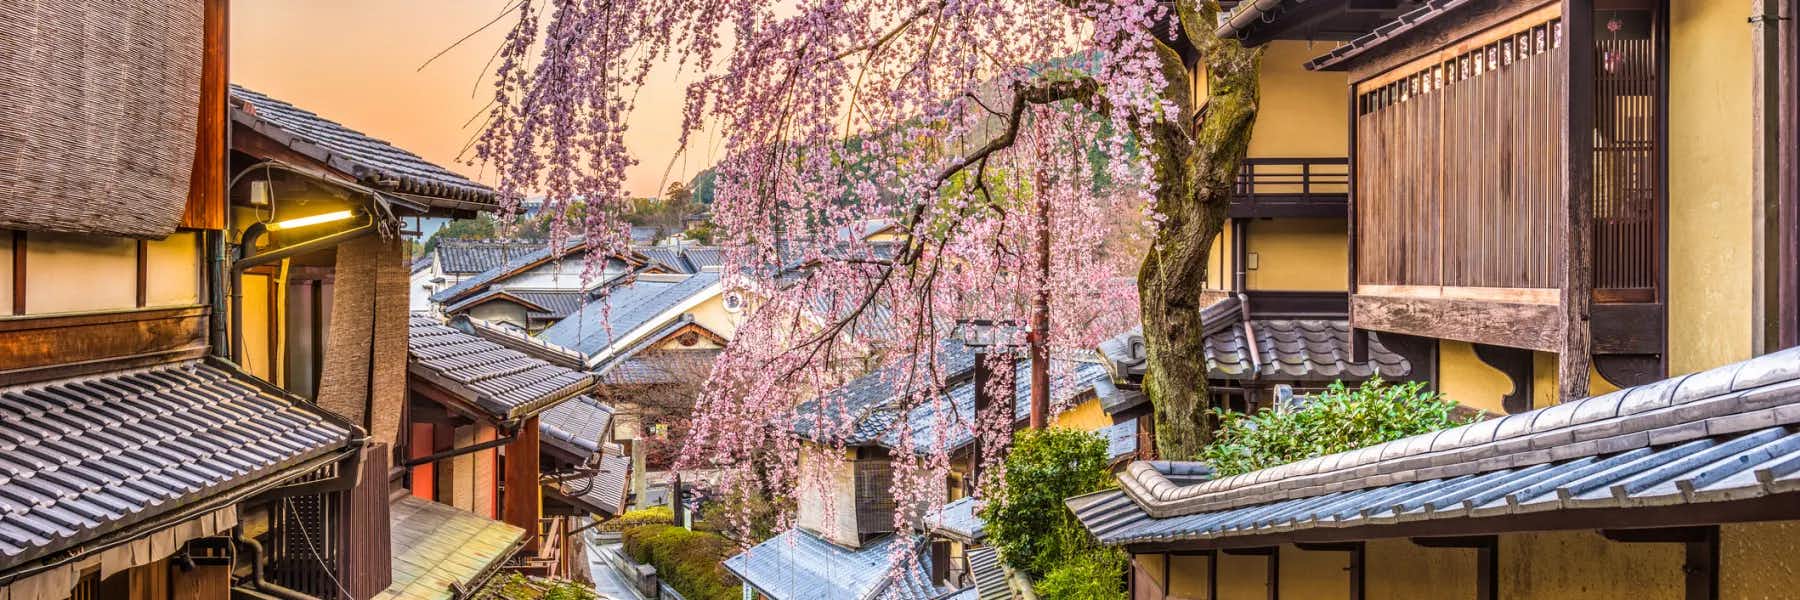 Discovering Traditional Japan in the City of Kyoto